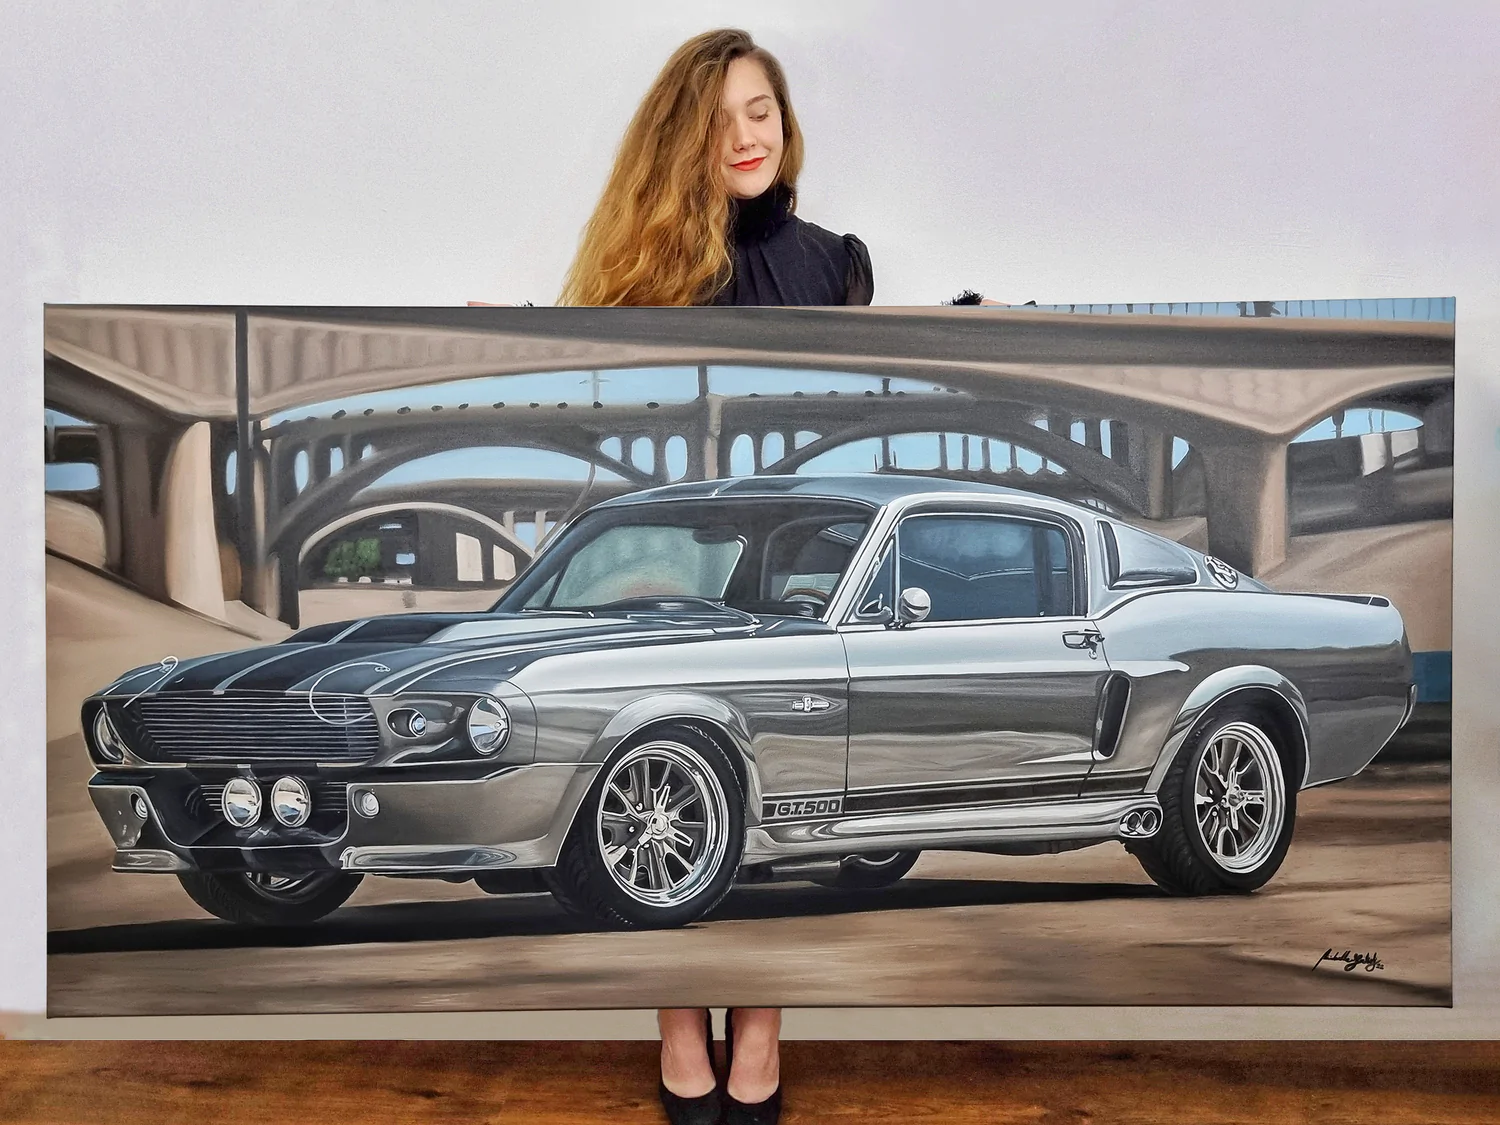 My oil painting, which took me 220 hours! - My, Auto, Wheelbarrow, Mustang, Motorists, Drawing